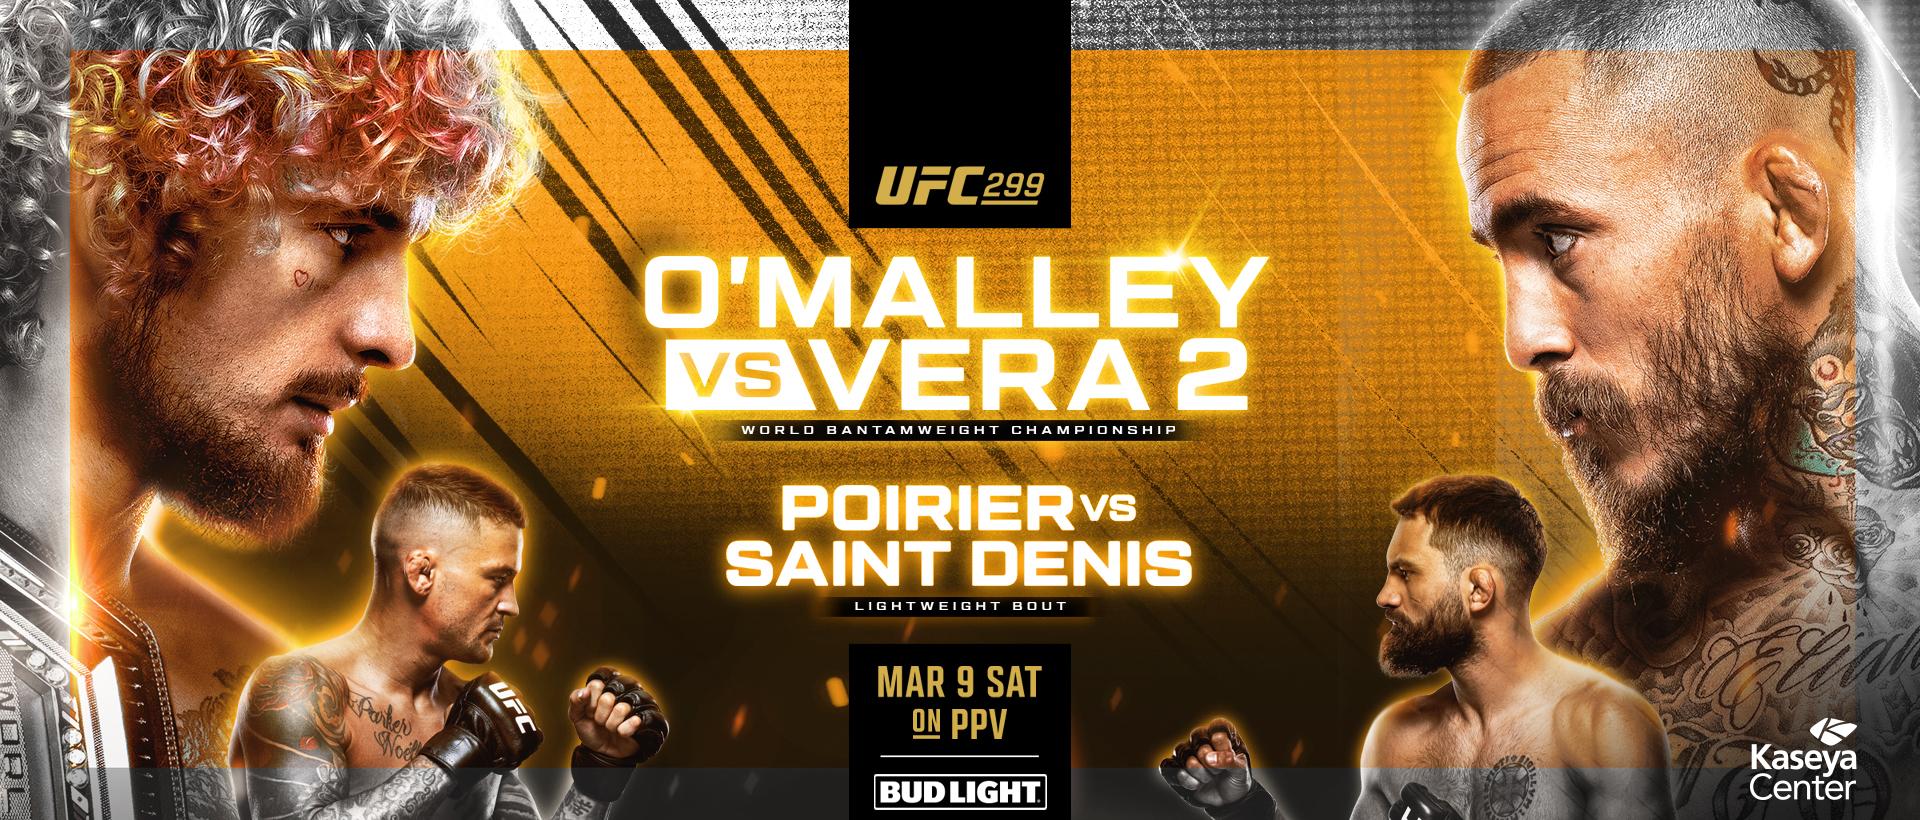 UFC 299: O’Malley vs Vera 2 Card, Odds, Start Time, Betting Trends, & How to Watch